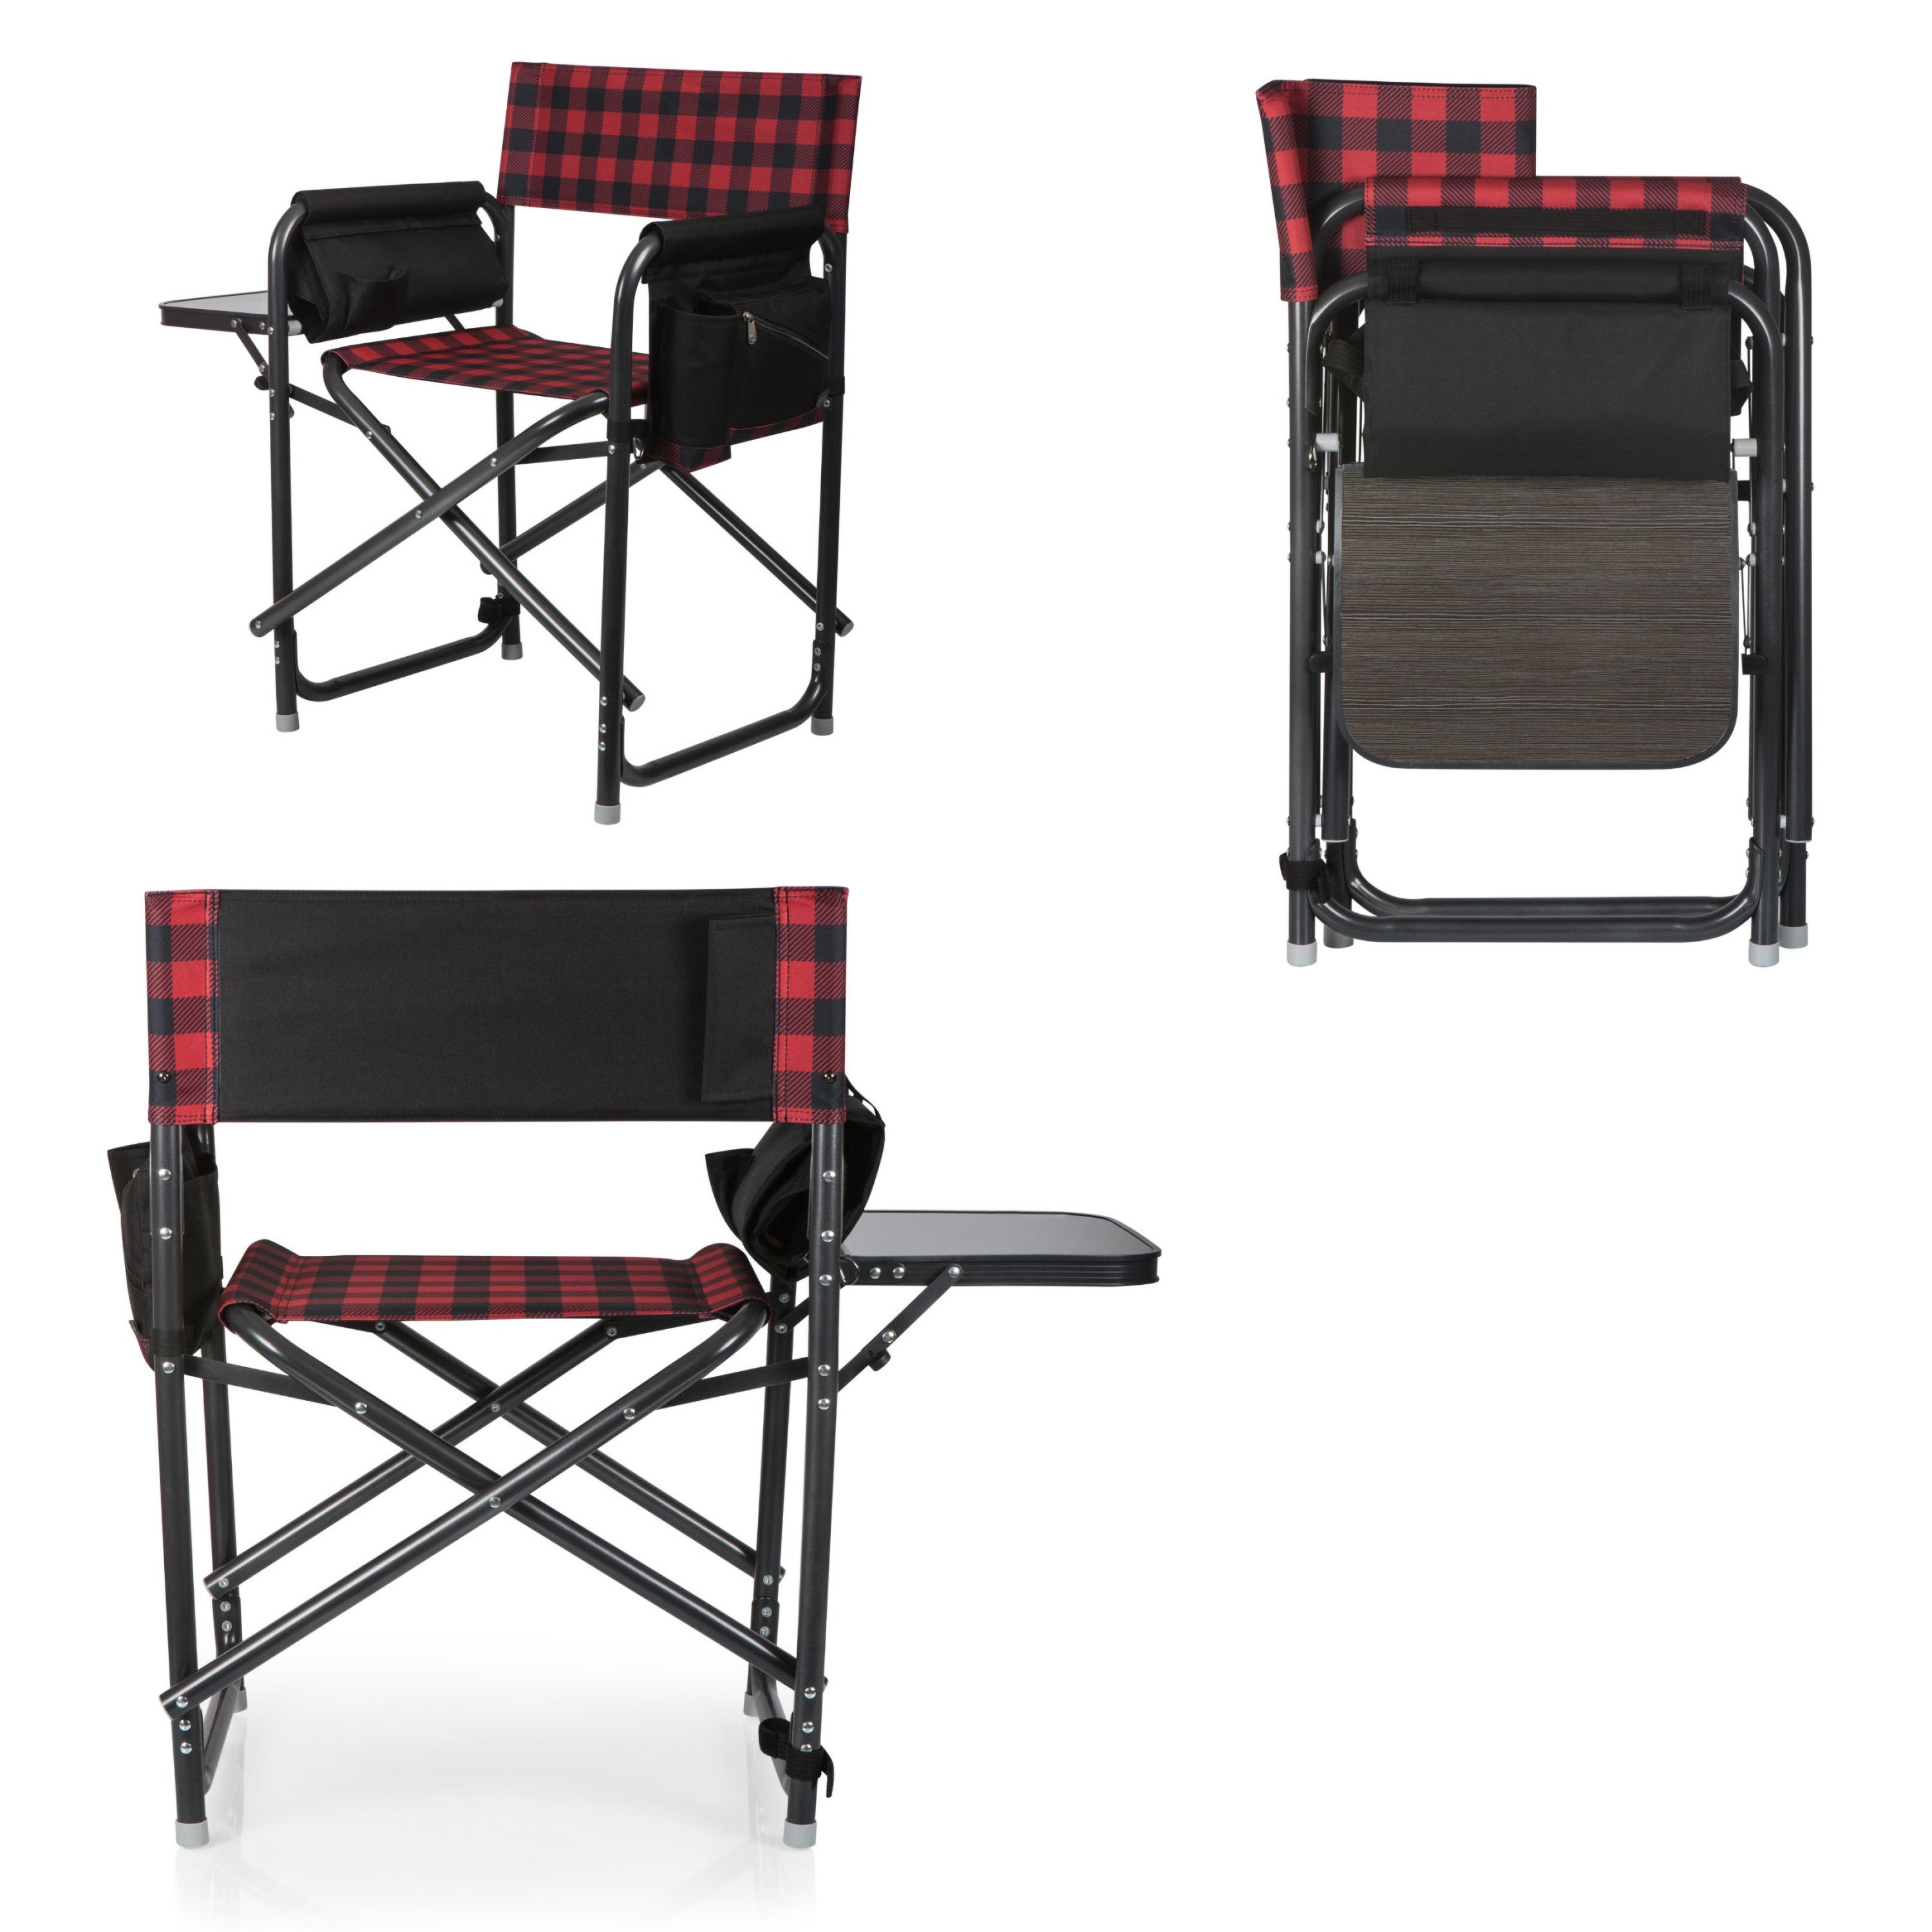 Outdoor Directors Folding Chair Red & Black Buffalo Plaid Pattern